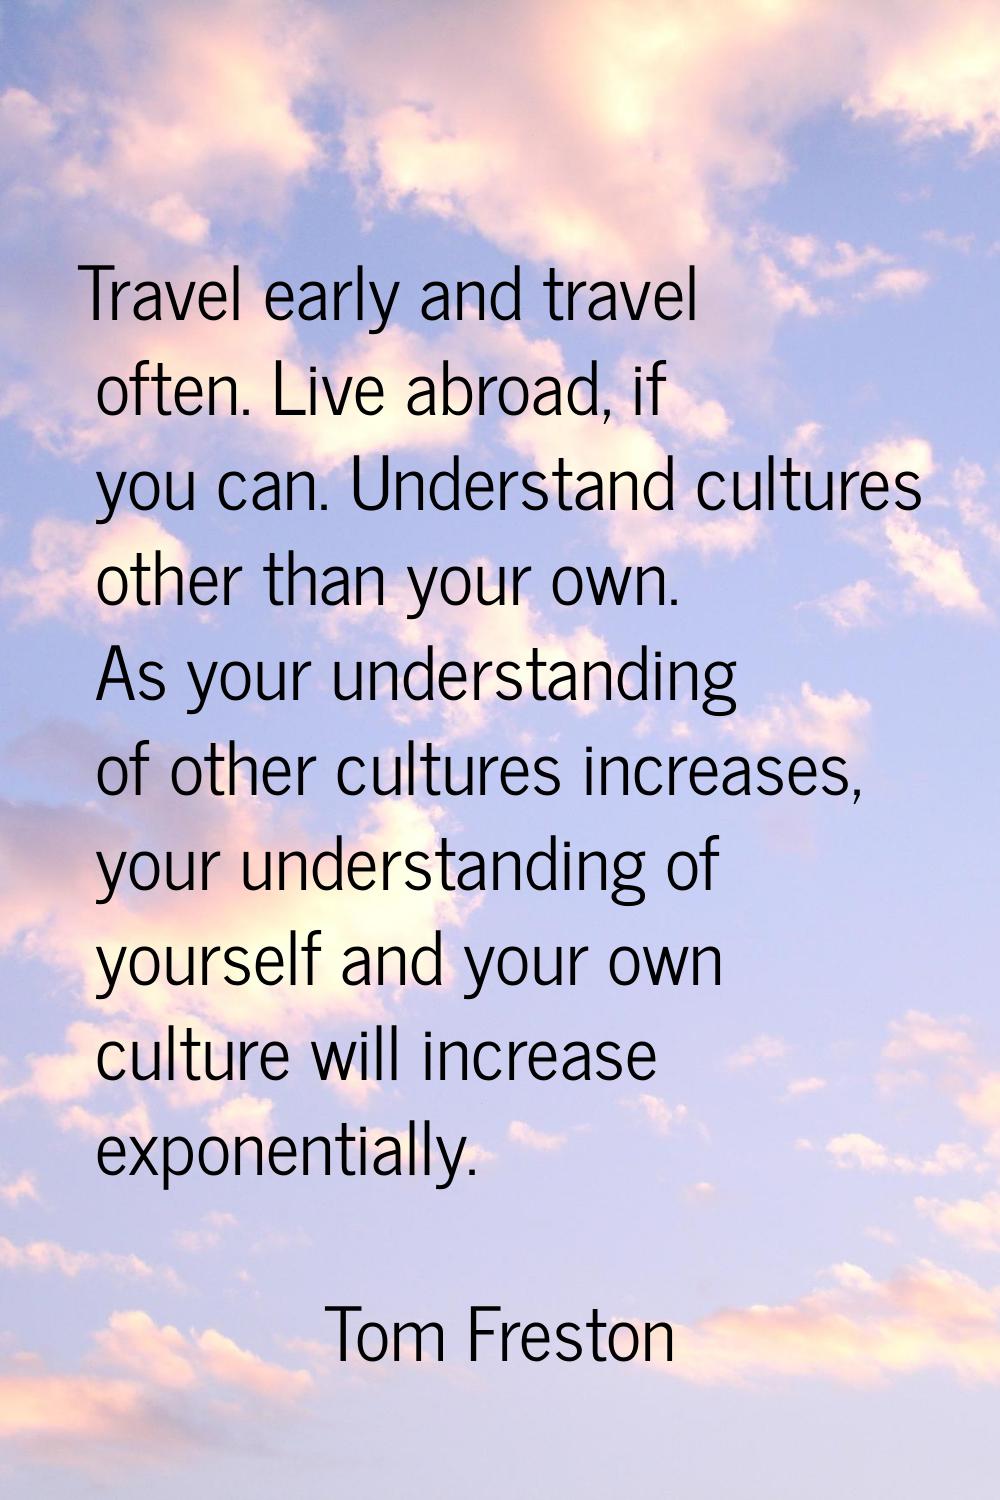 Travel early and travel often. Live abroad, if you can. Understand cultures other than your own. As